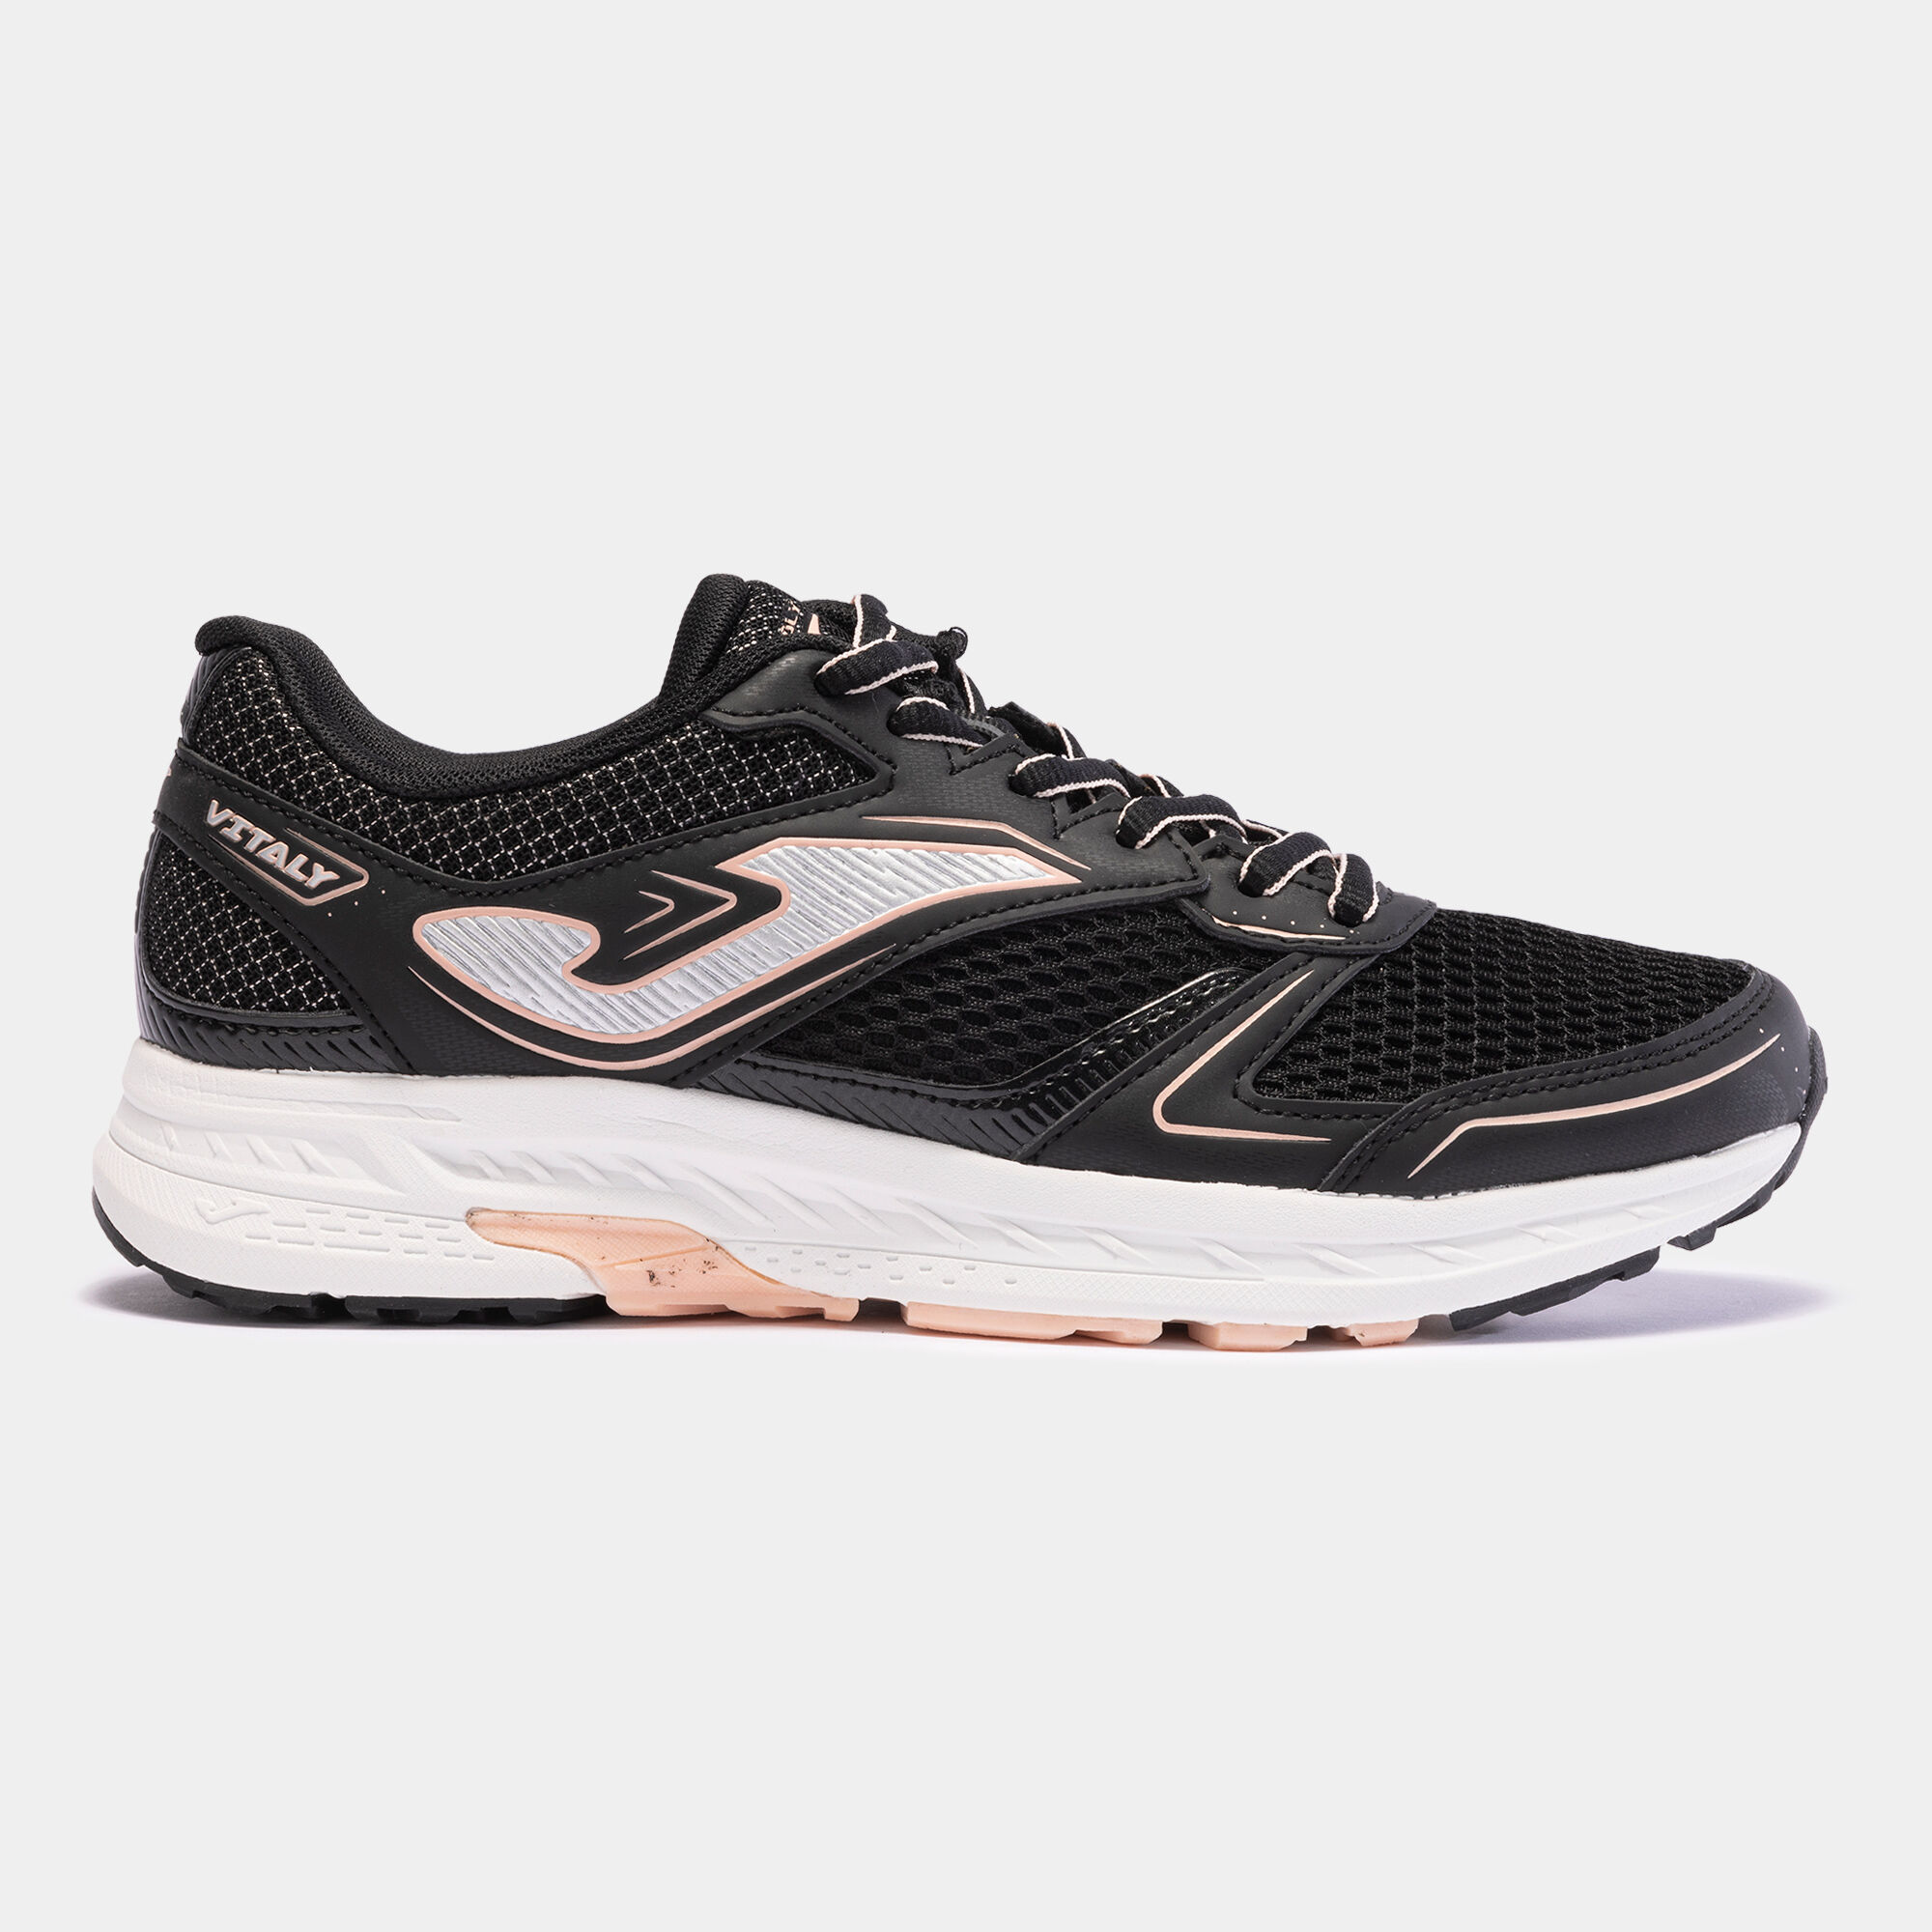 Running shoes R.Vitaly Lady 23 woman black pink